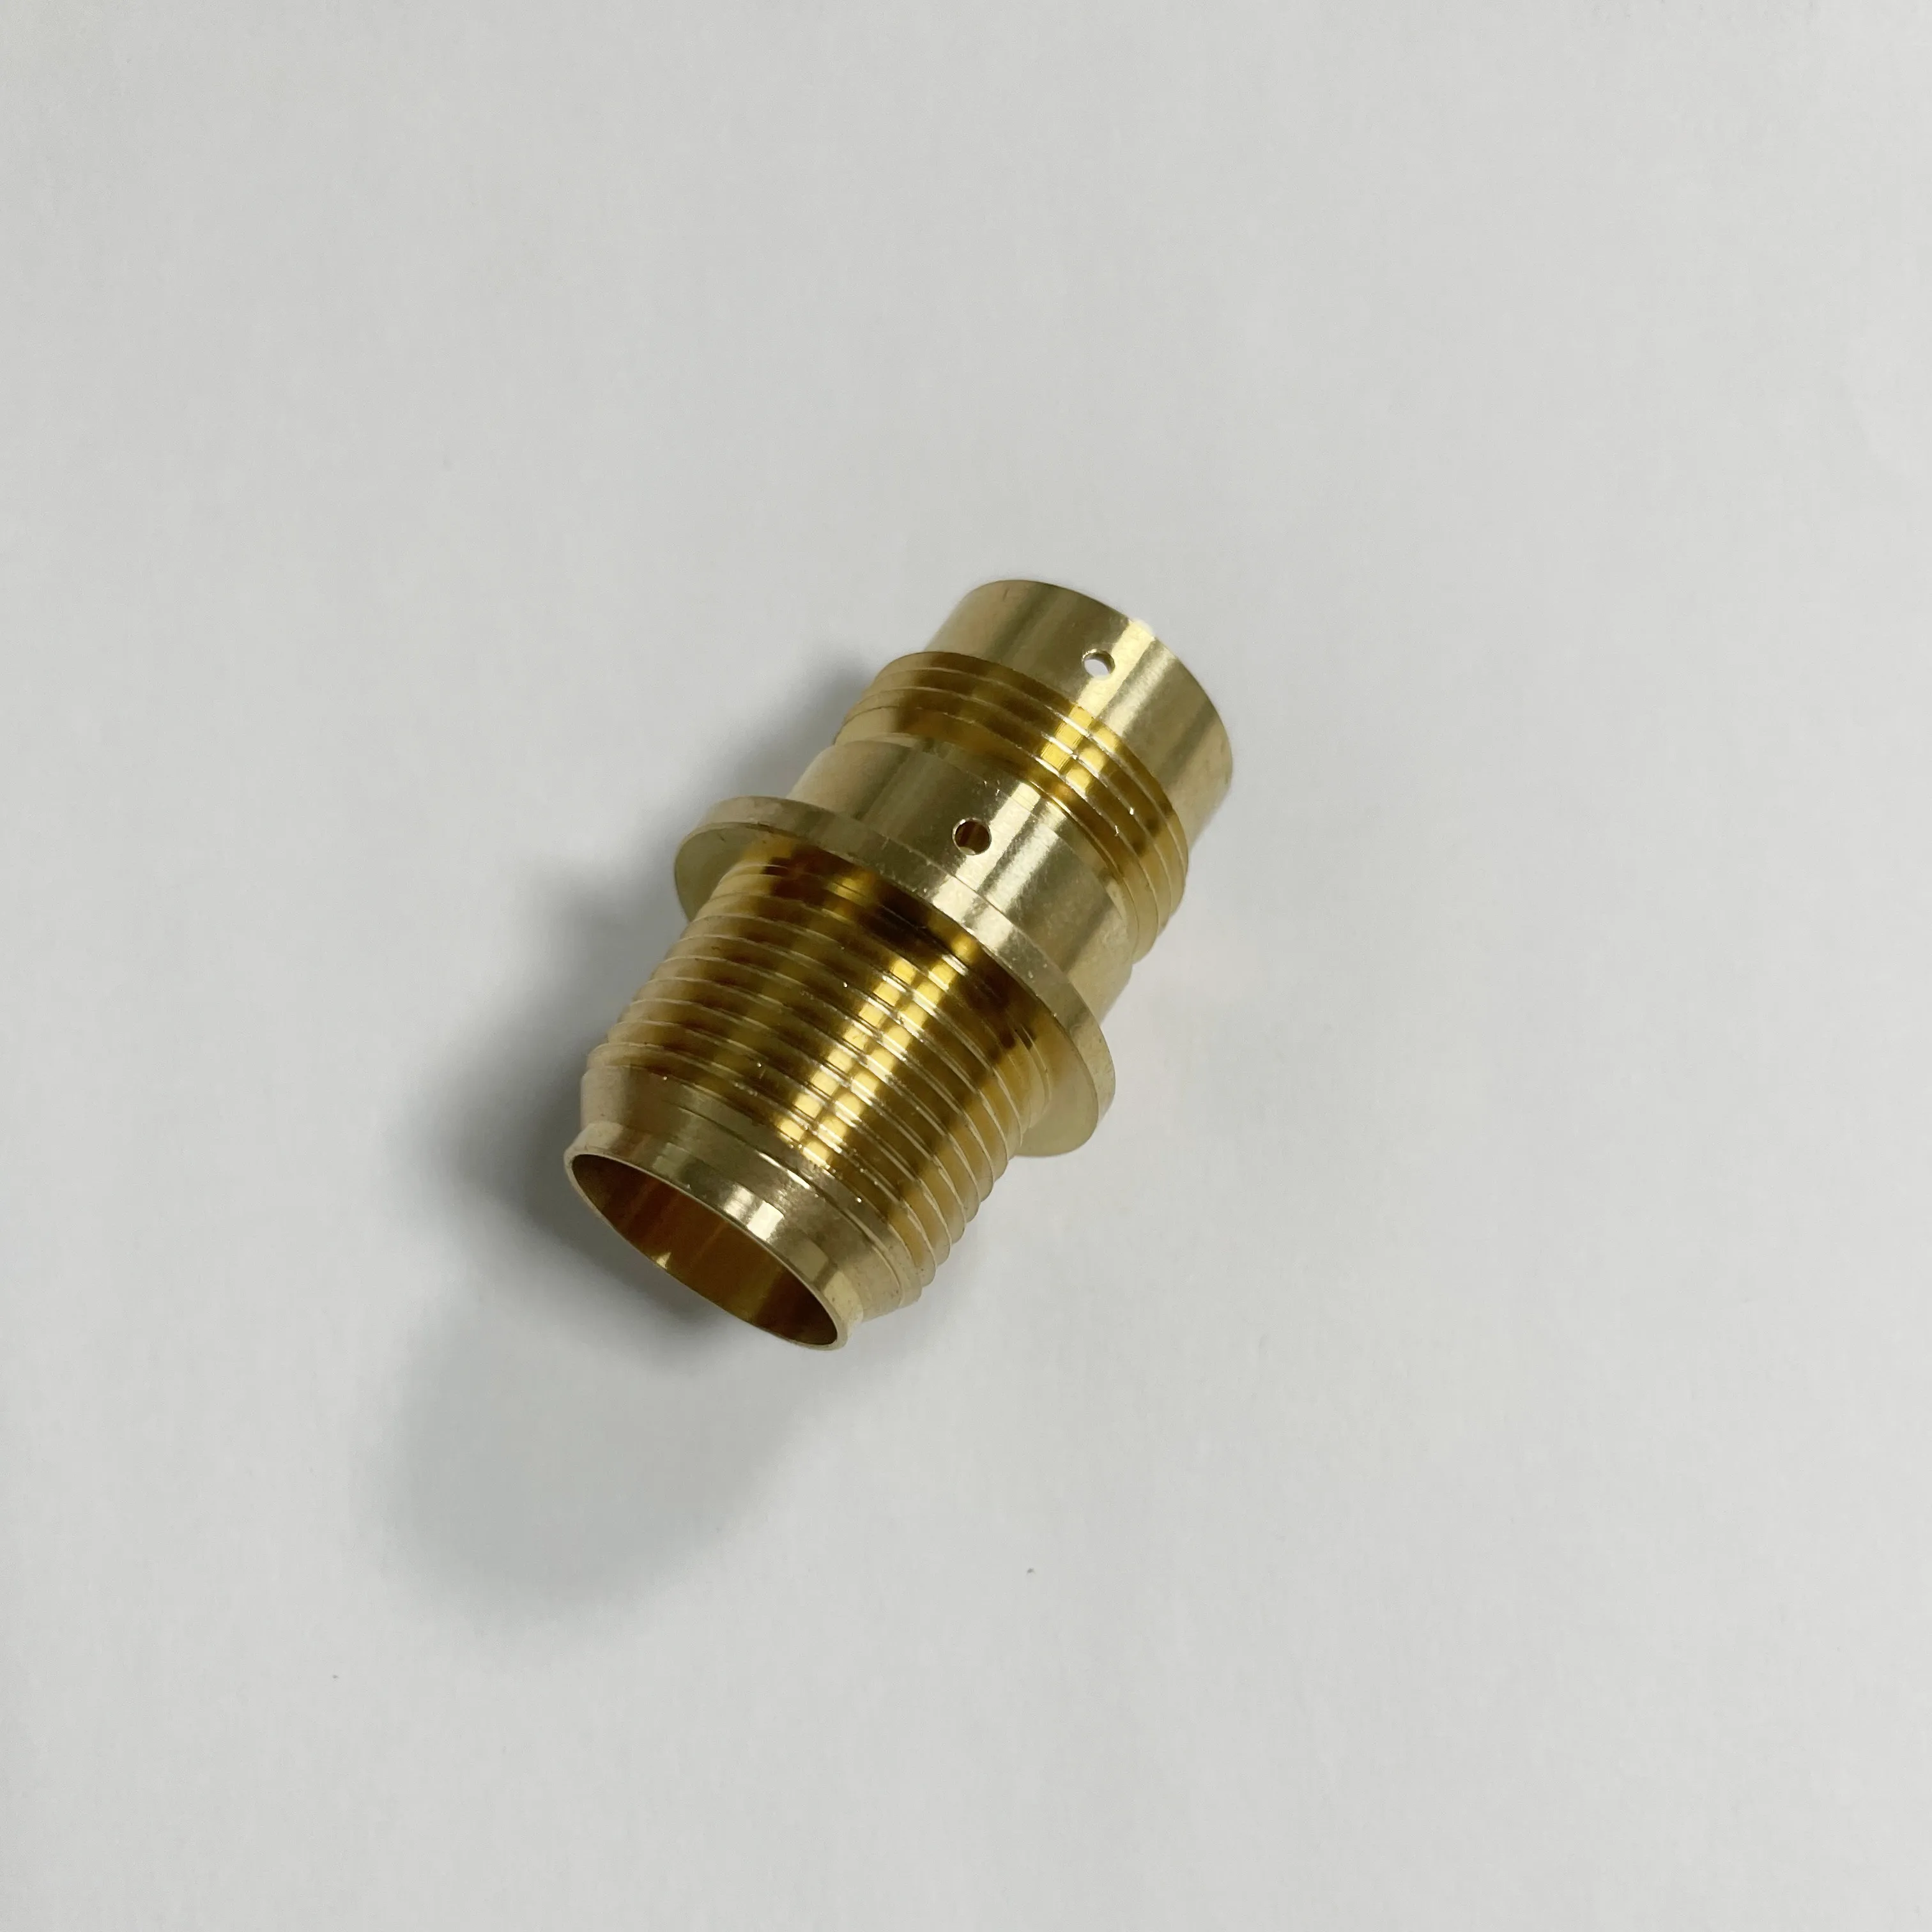 Brass Ferrule Hose Compression Pipe Fittings Brass Male to Copper Connector Reducing brass fittings